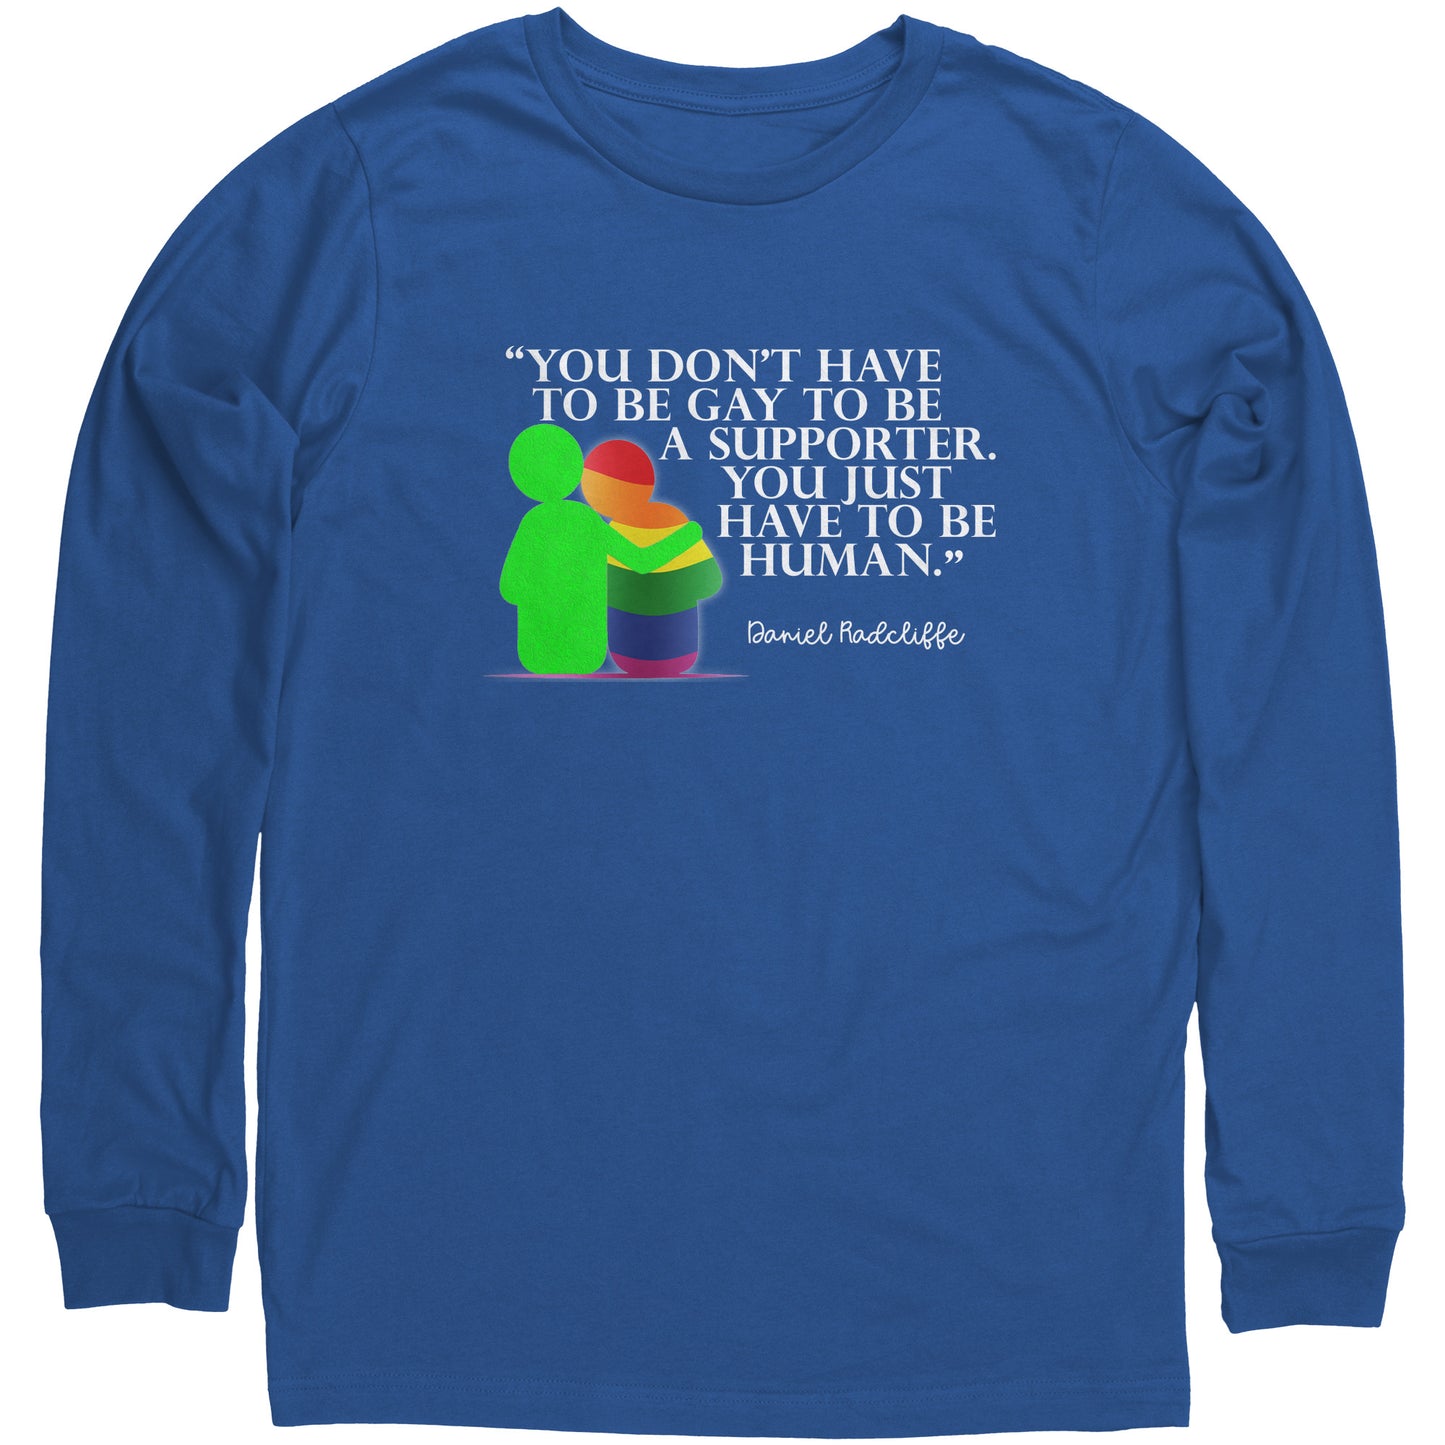 You Don't Have To Be Gay To Be A Supporter. You Just Have to be Human. T-Shirt, Hoodie, Sweatshirt